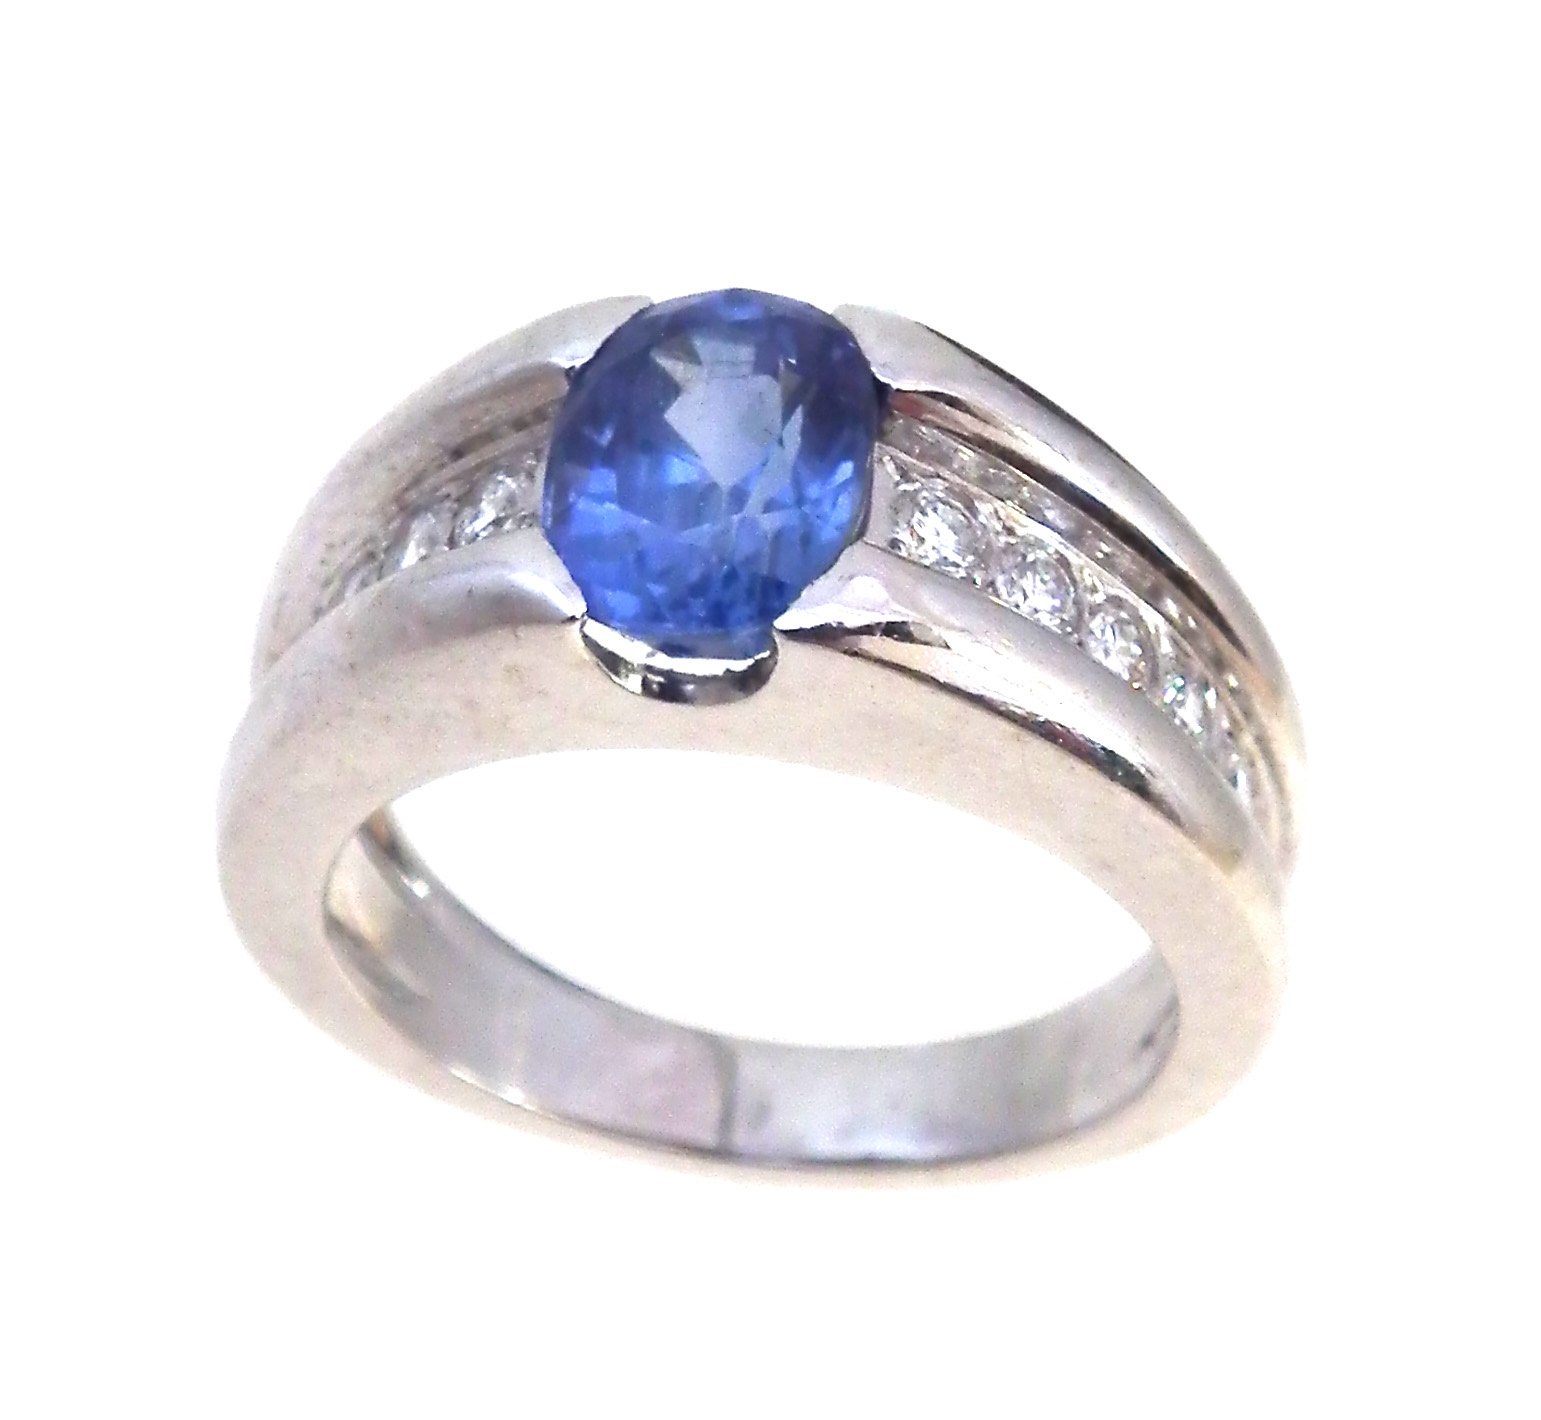 Sapphire and diamond 18ct white gold ring.